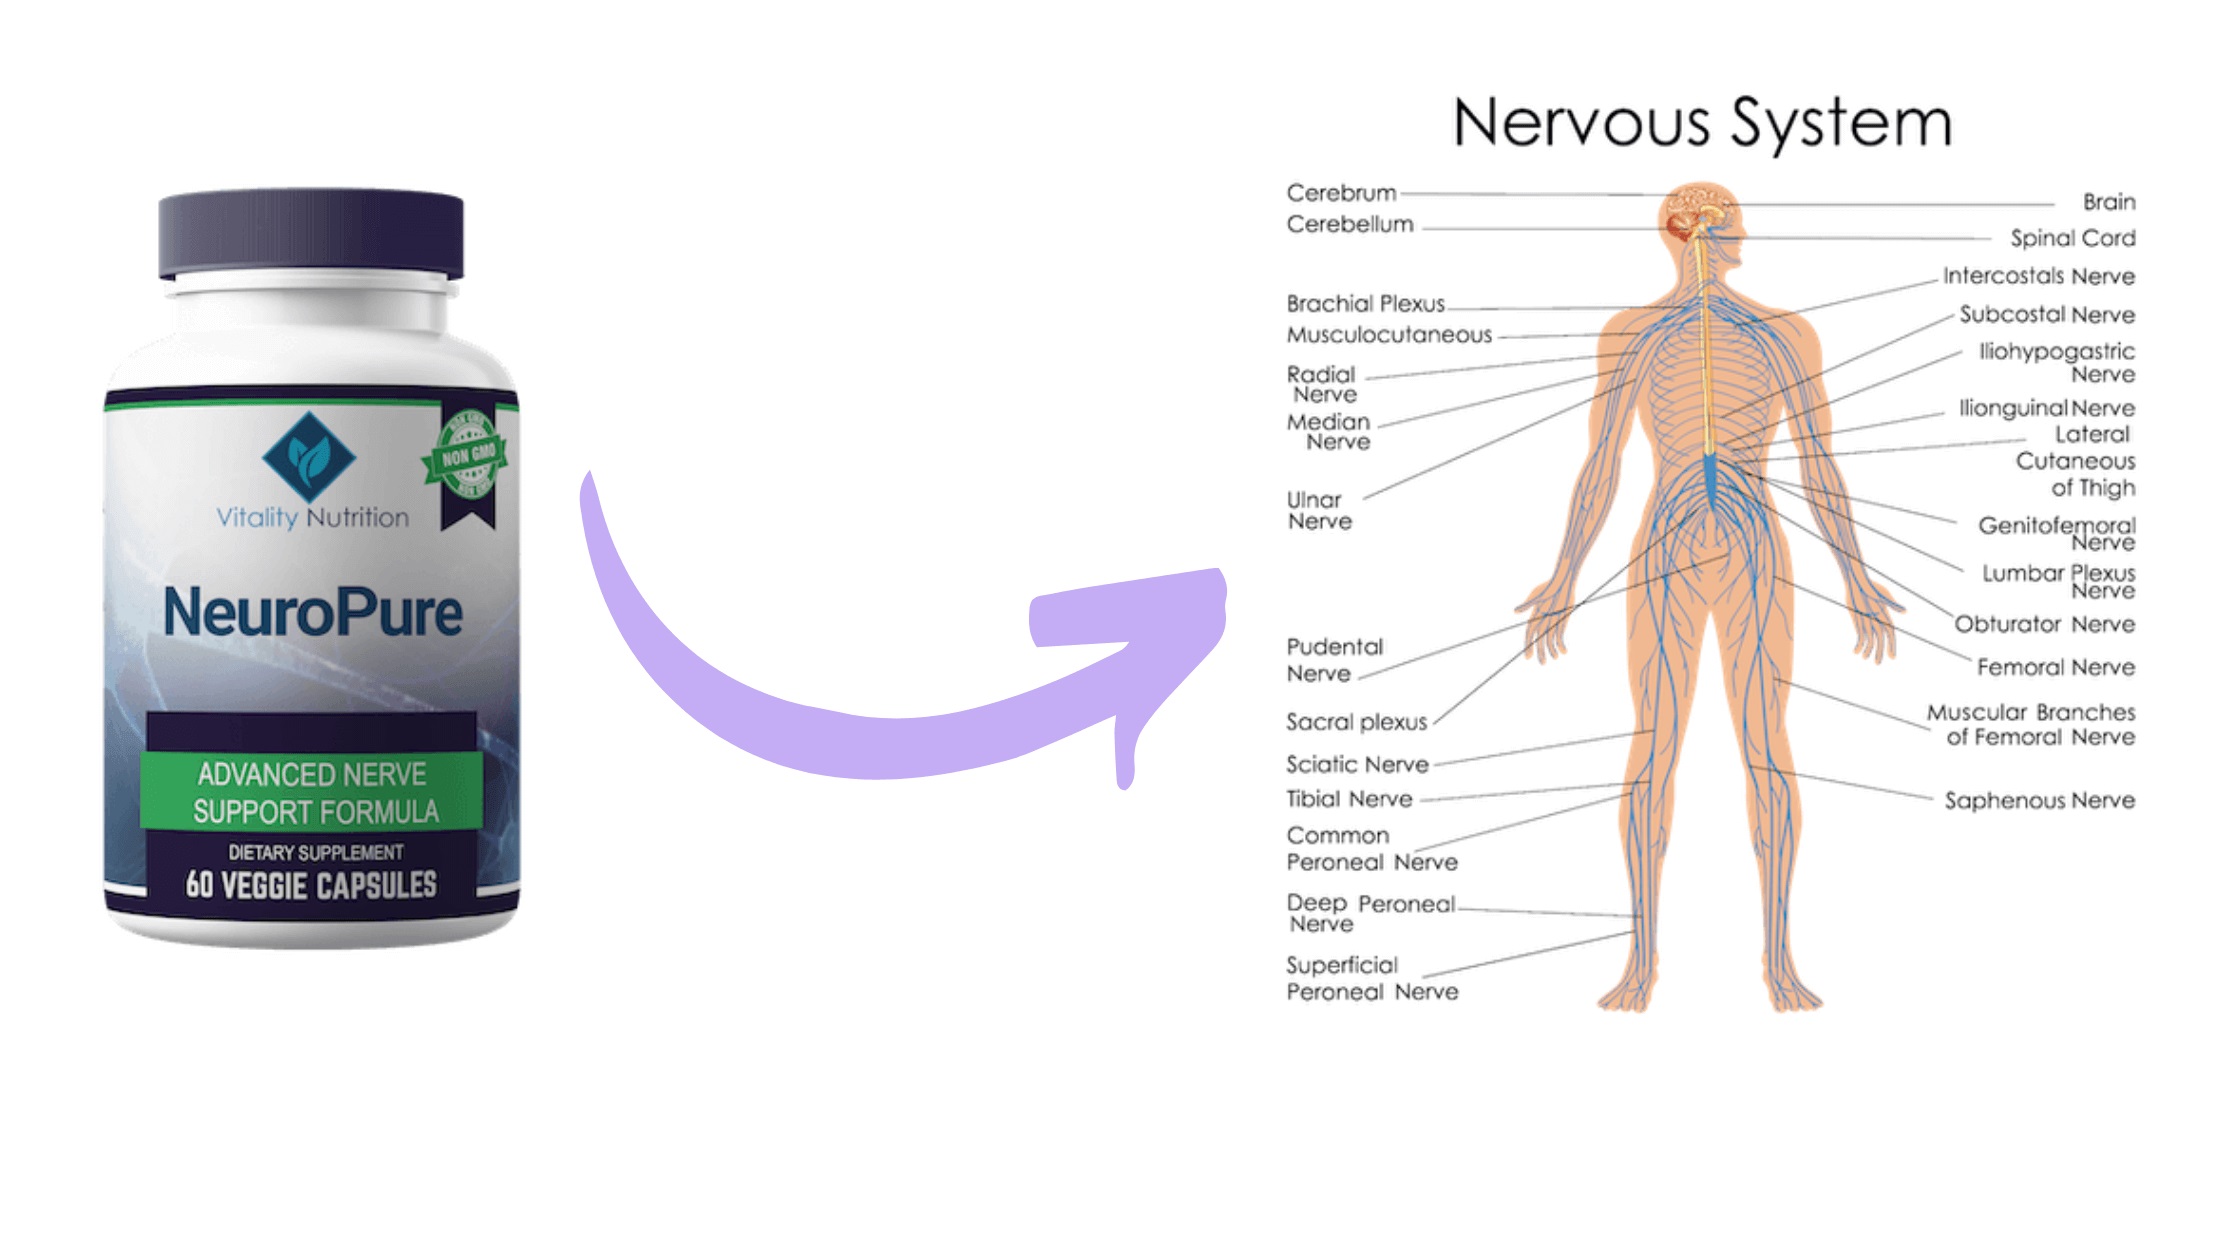 NeuroPure Reviews: How Much Effective Is Vitality Nutrition Neuro Pure? -  IPS Inter Press Service Business